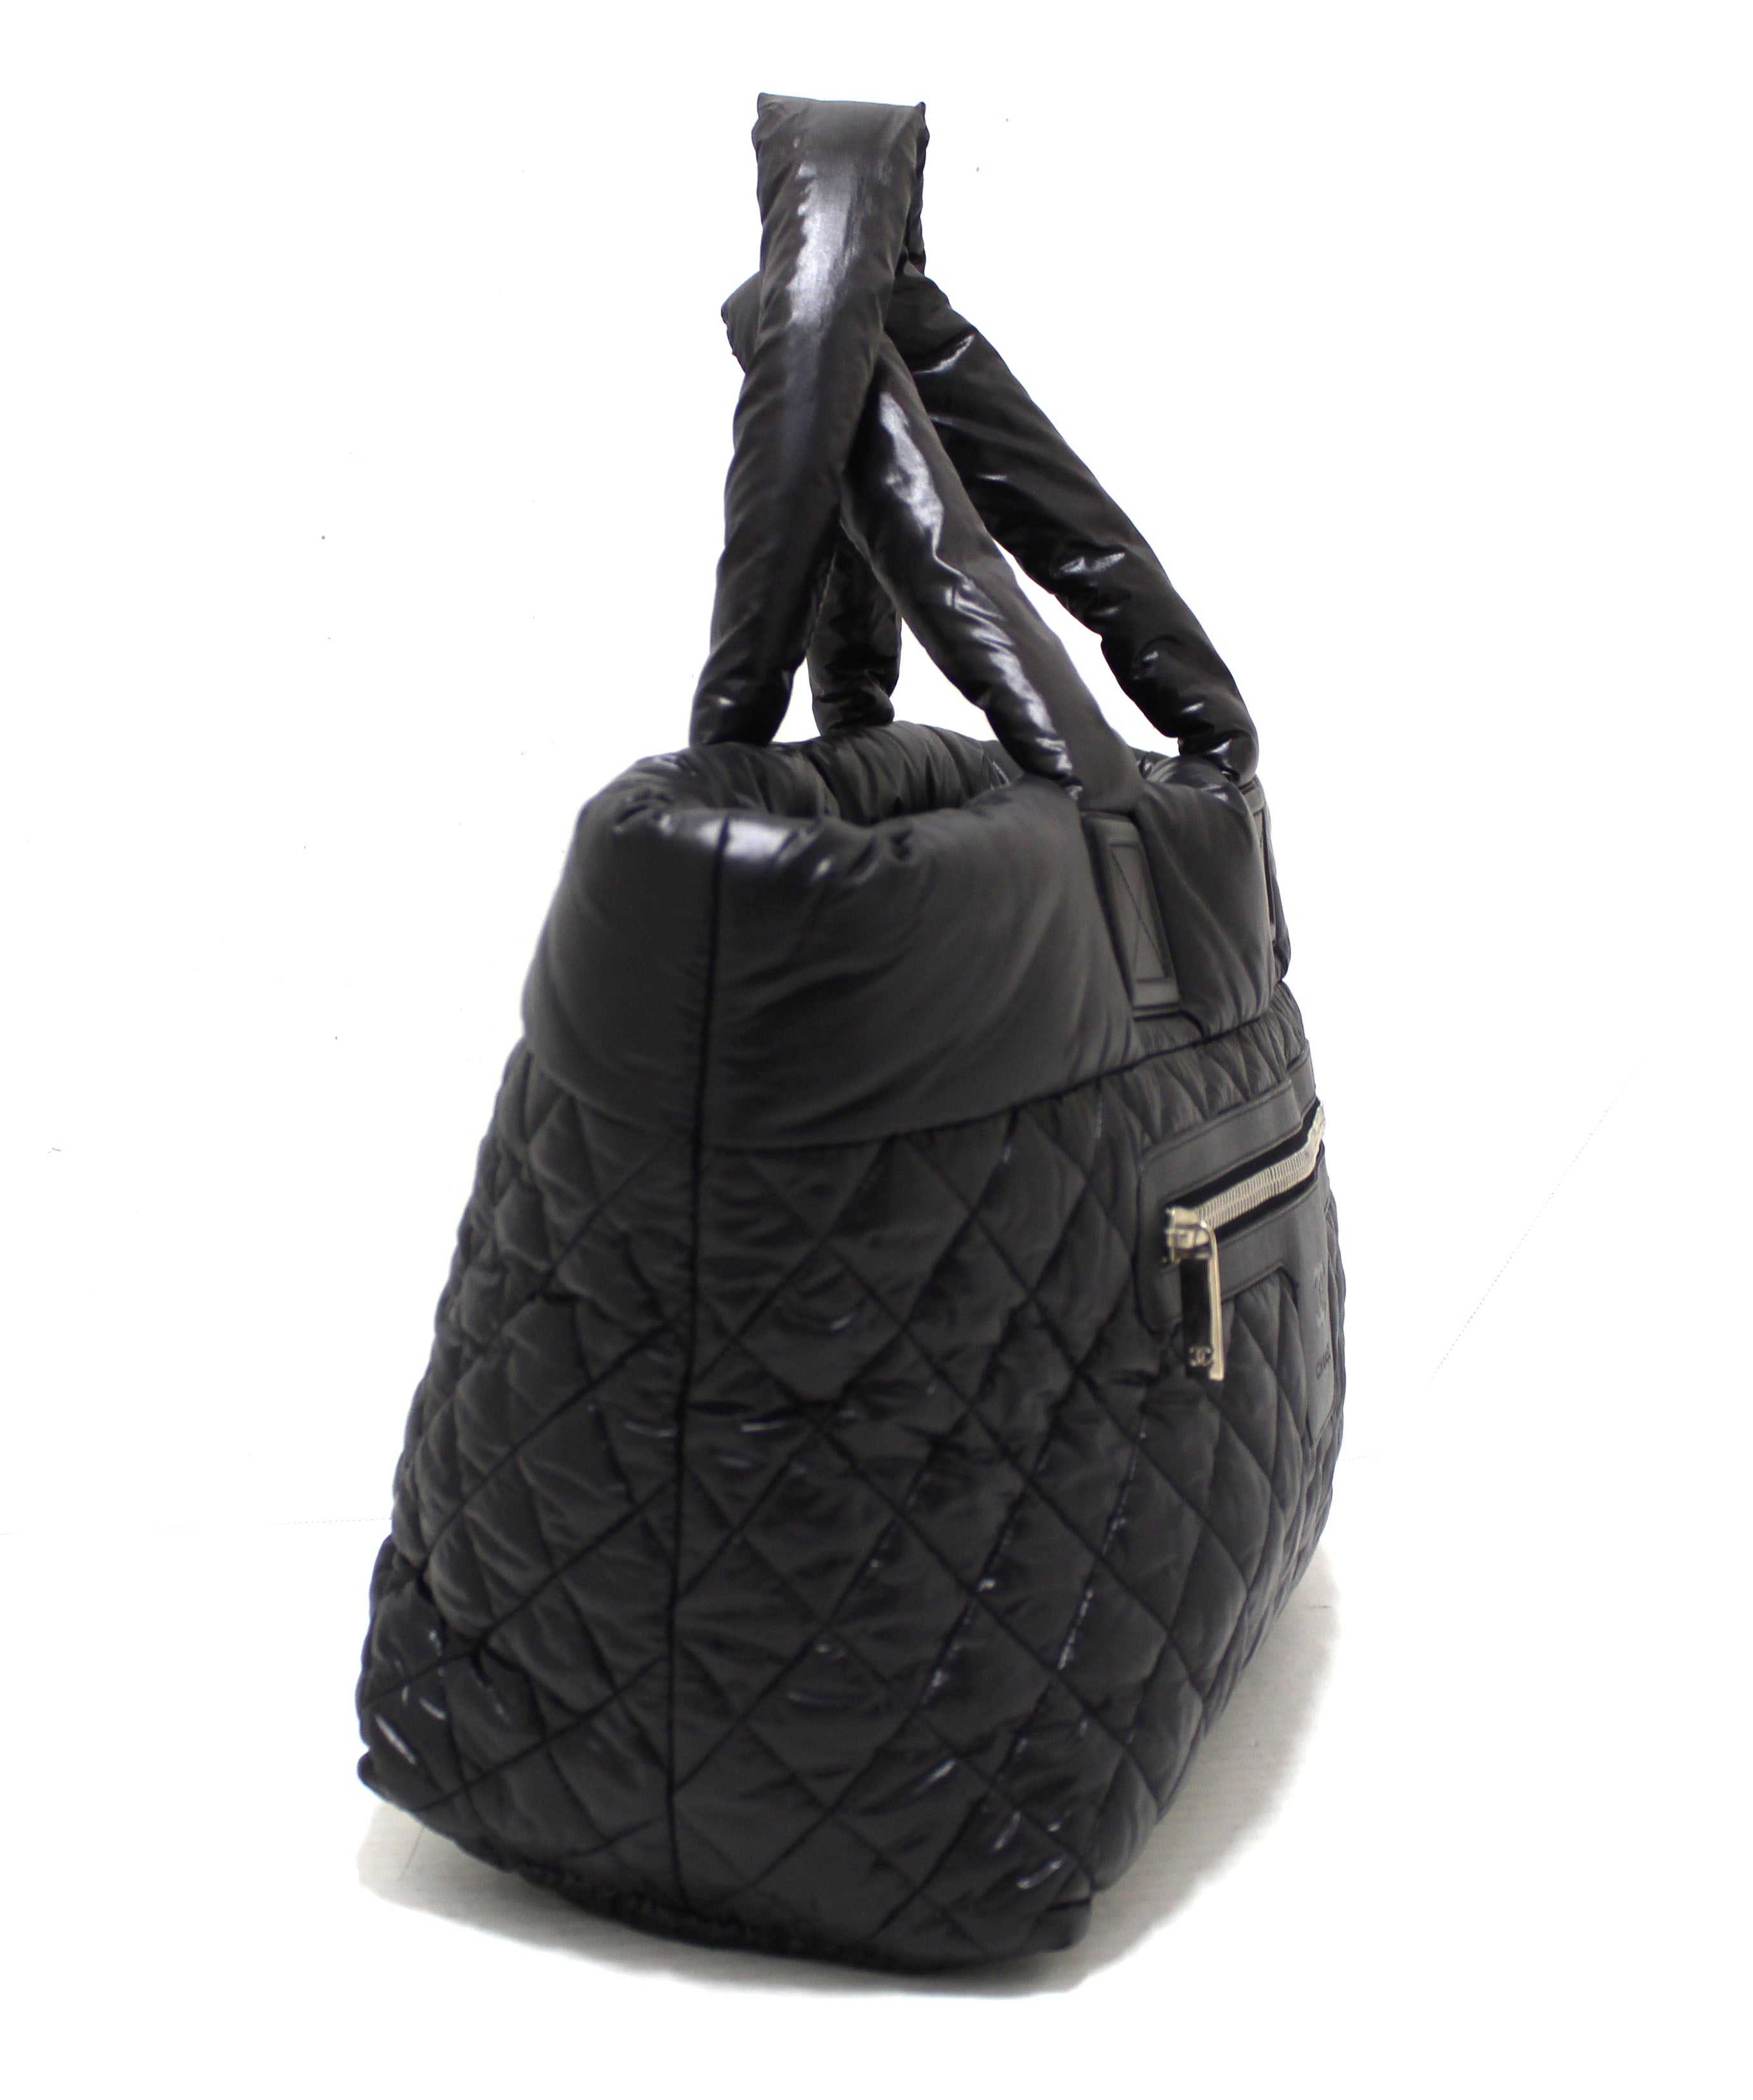 Authentic Chanel Coco Cocoon Black Quilted Nylon Reversible Tote